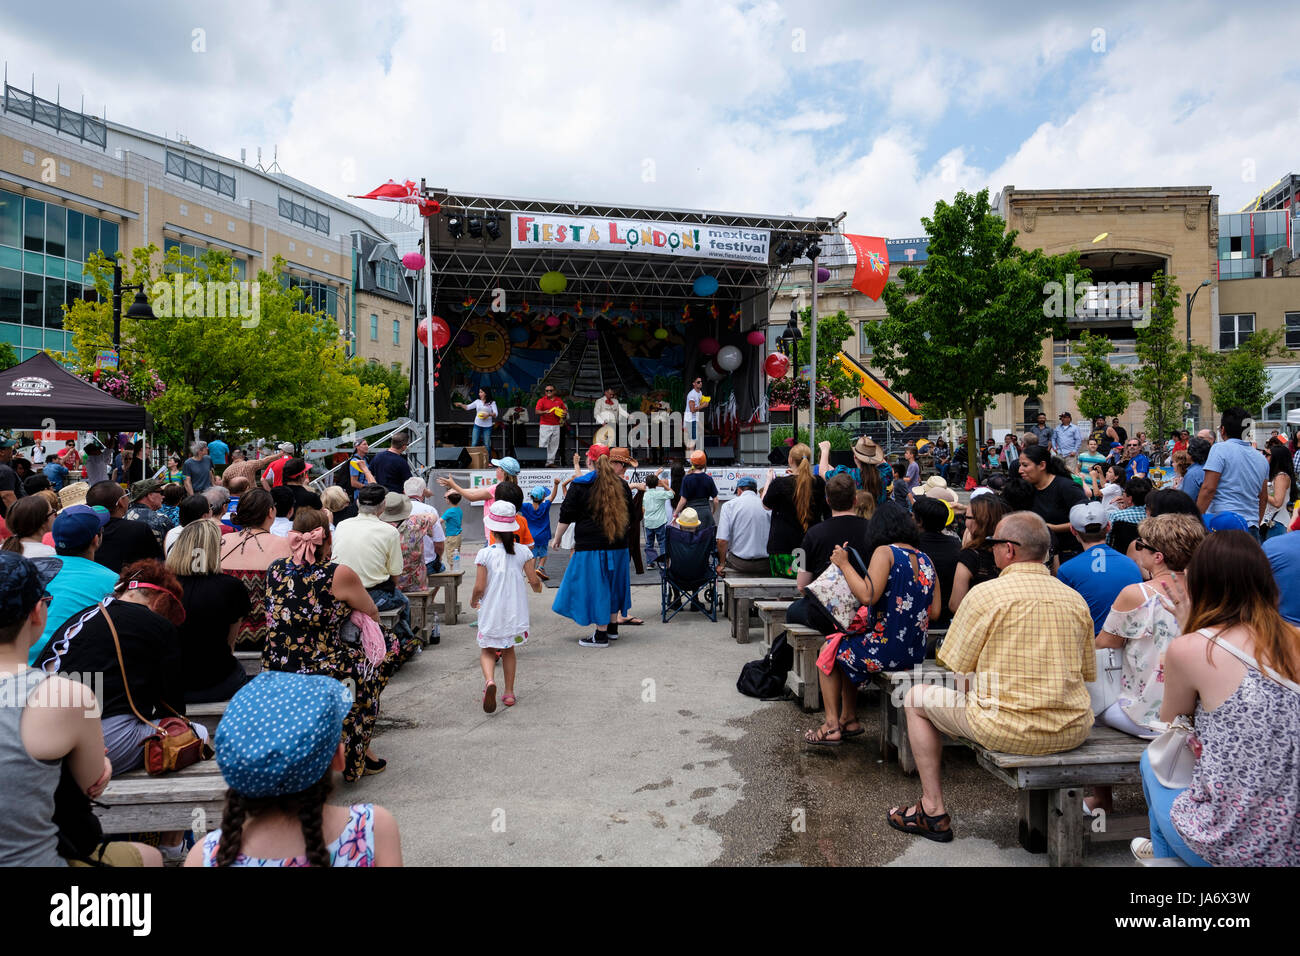 London, Ontario, Canada. 4th June, 2017. Fiesta London! Mexican festival celebrating the sounds, culture, and food of Mexico at the Covent Garden Market, in downtown London, Ontario. Held annually, the festival brings together a variety of performers, colourful folkloric dancers, singers, and entertainment from throughout Latin America. Public enjoying an afternoon of music in downtown London. Credit: Rubens Alarcon/Alamy Live News Stock Photo